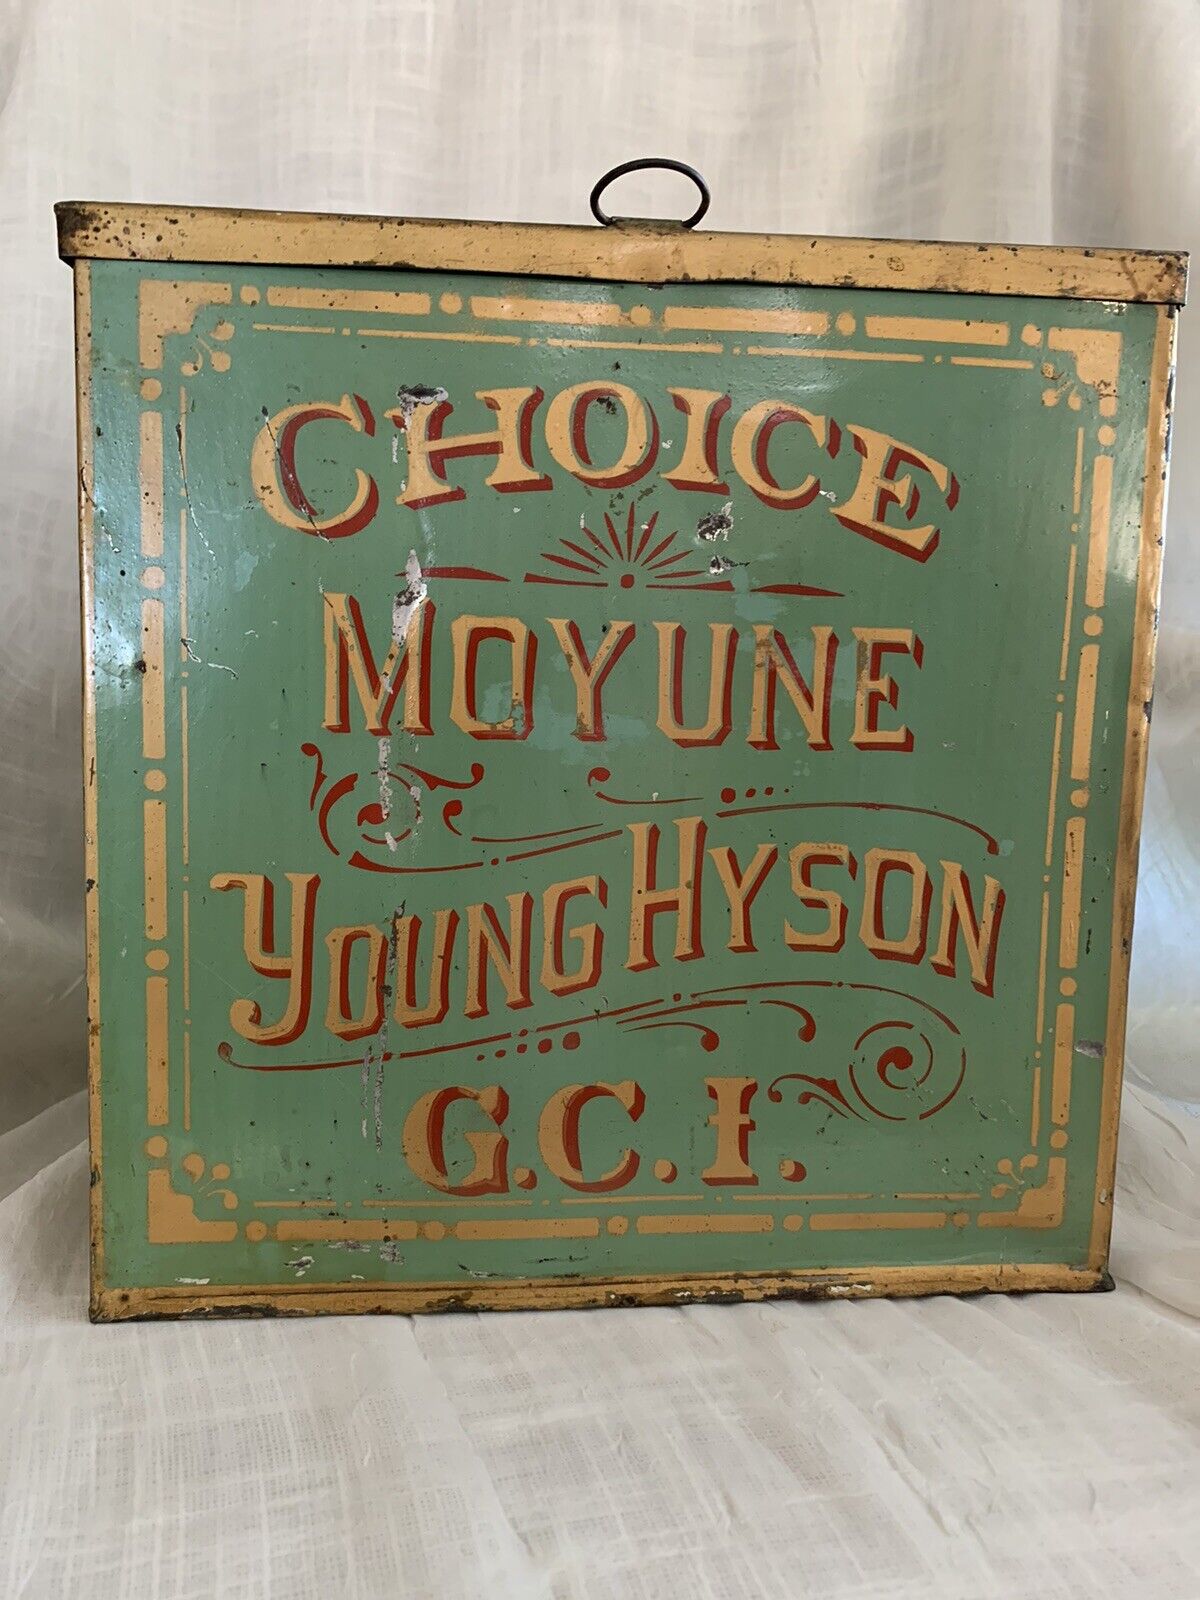 Antique: Choice Moyune Young Hyson G.C.I Store Counter Display Tin